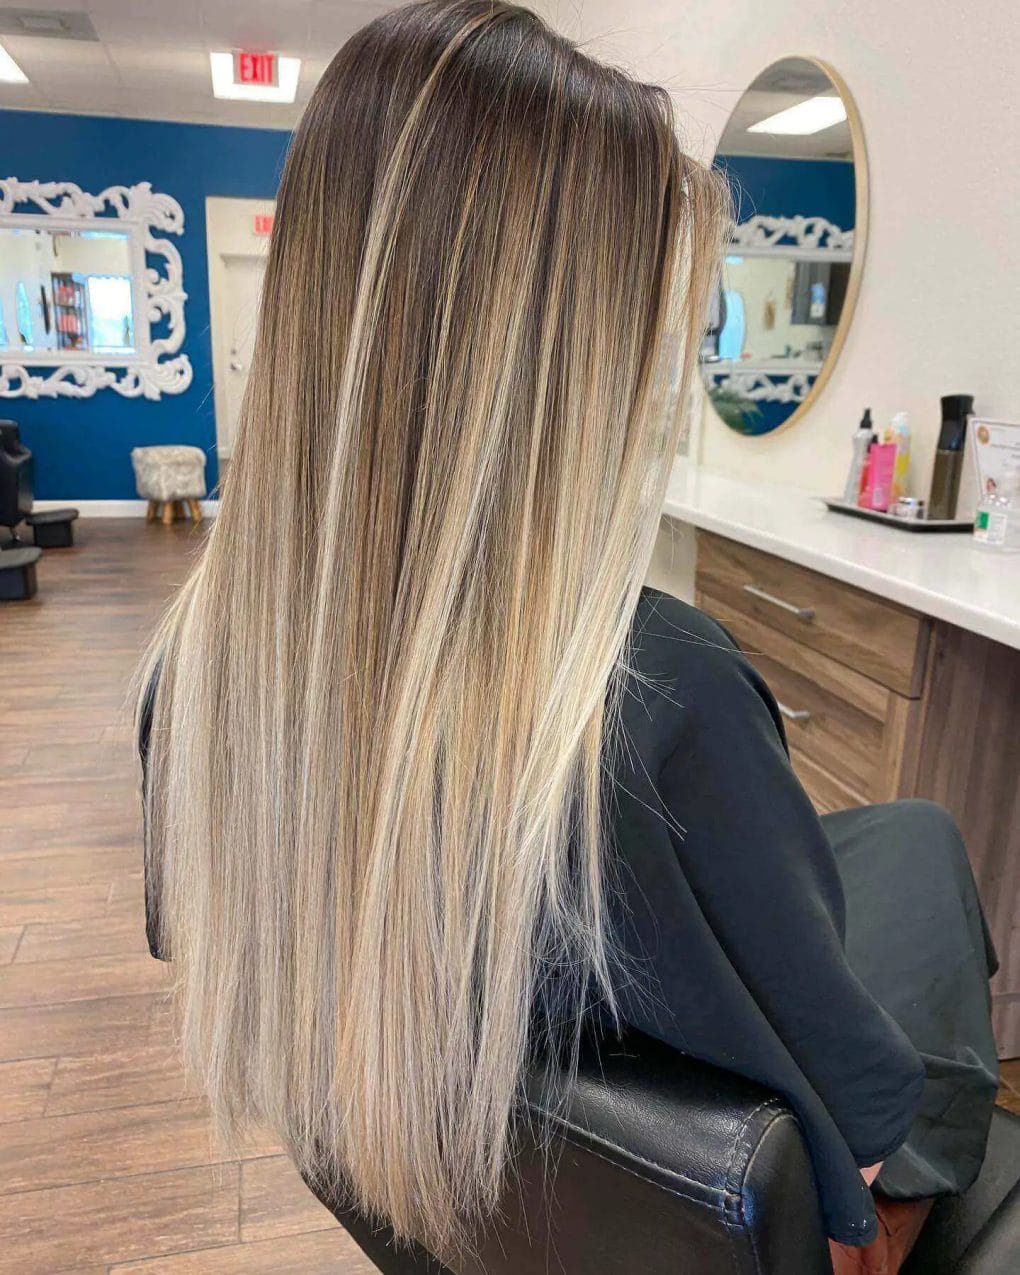 Brunette roots blending to sun-kissed blonde balayage on straight hair.